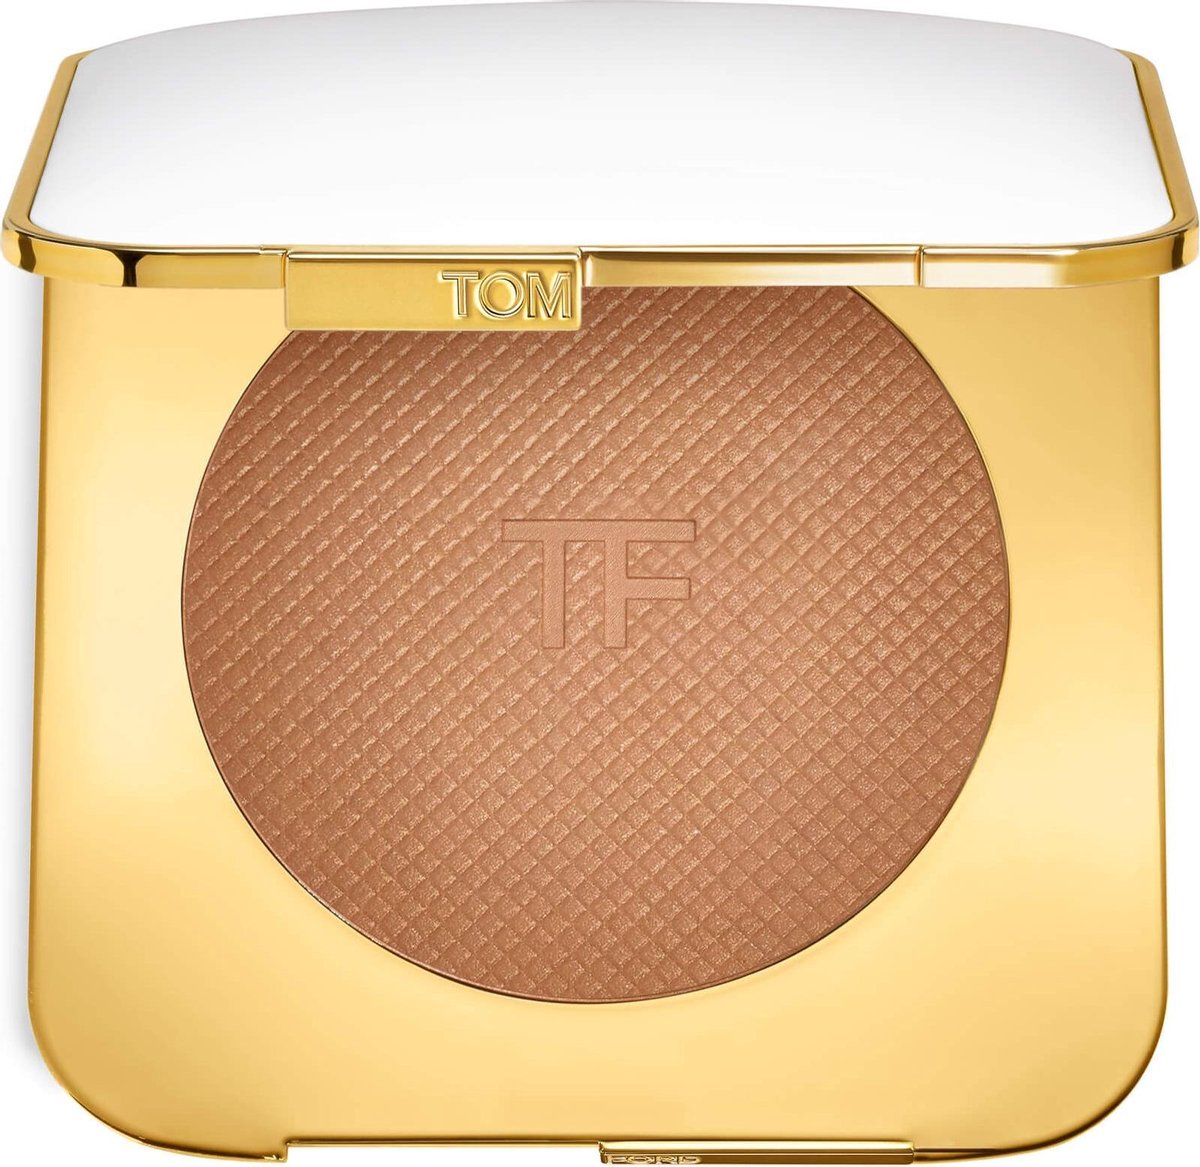 Tom Ford Beauty - Soleil Glow Bronzer Terra (Small)